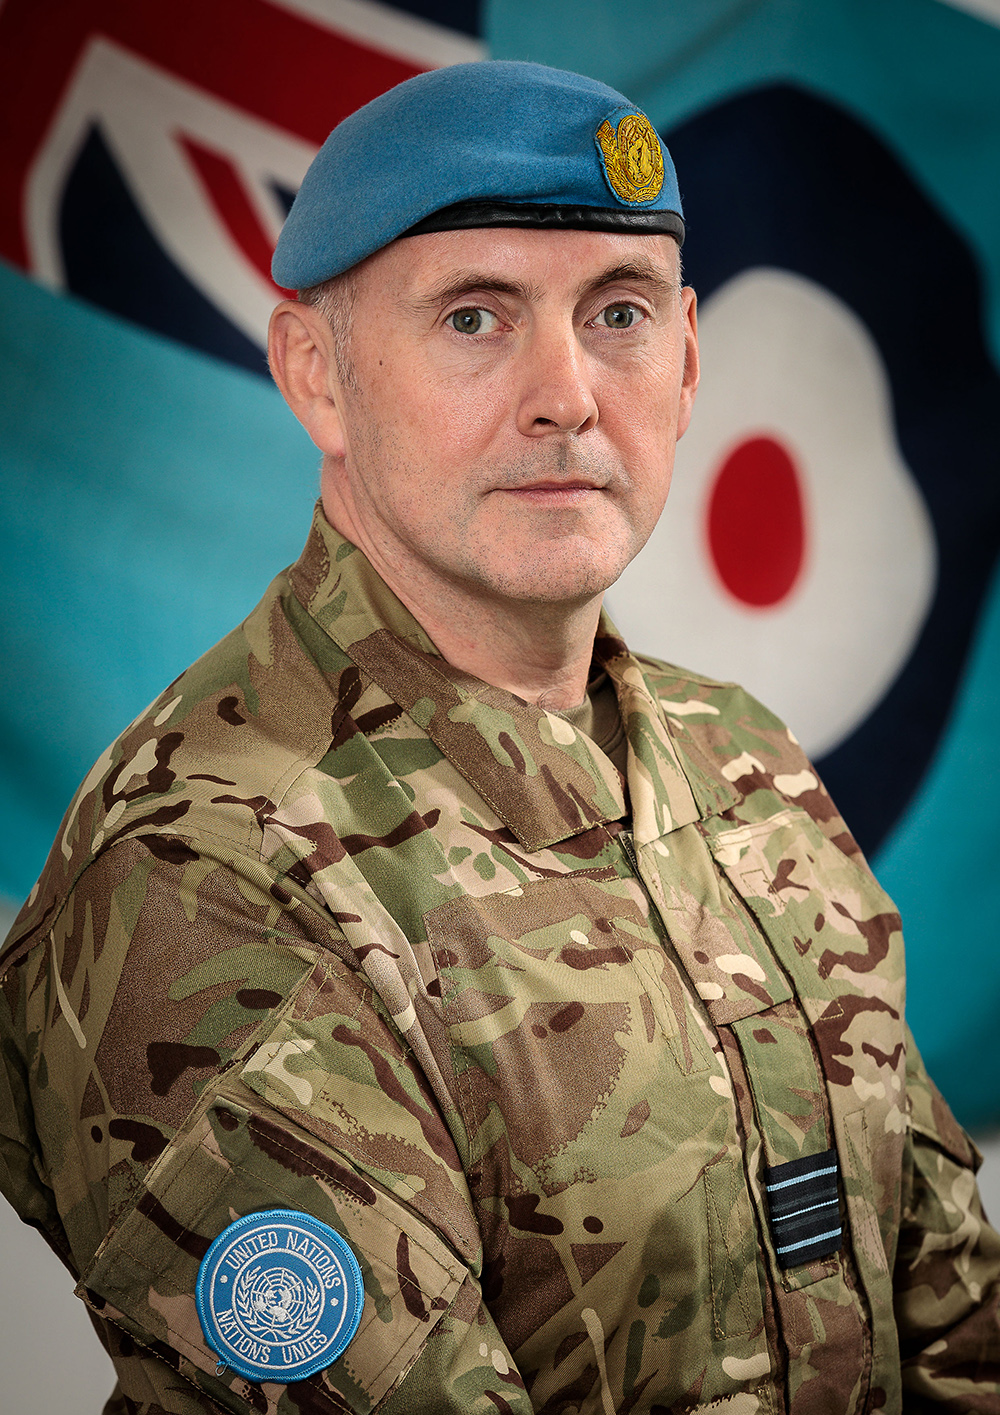 Squadron Leader Fitzgerald, Officer Commanding Role Two Hospital, Operation TRENTON 5